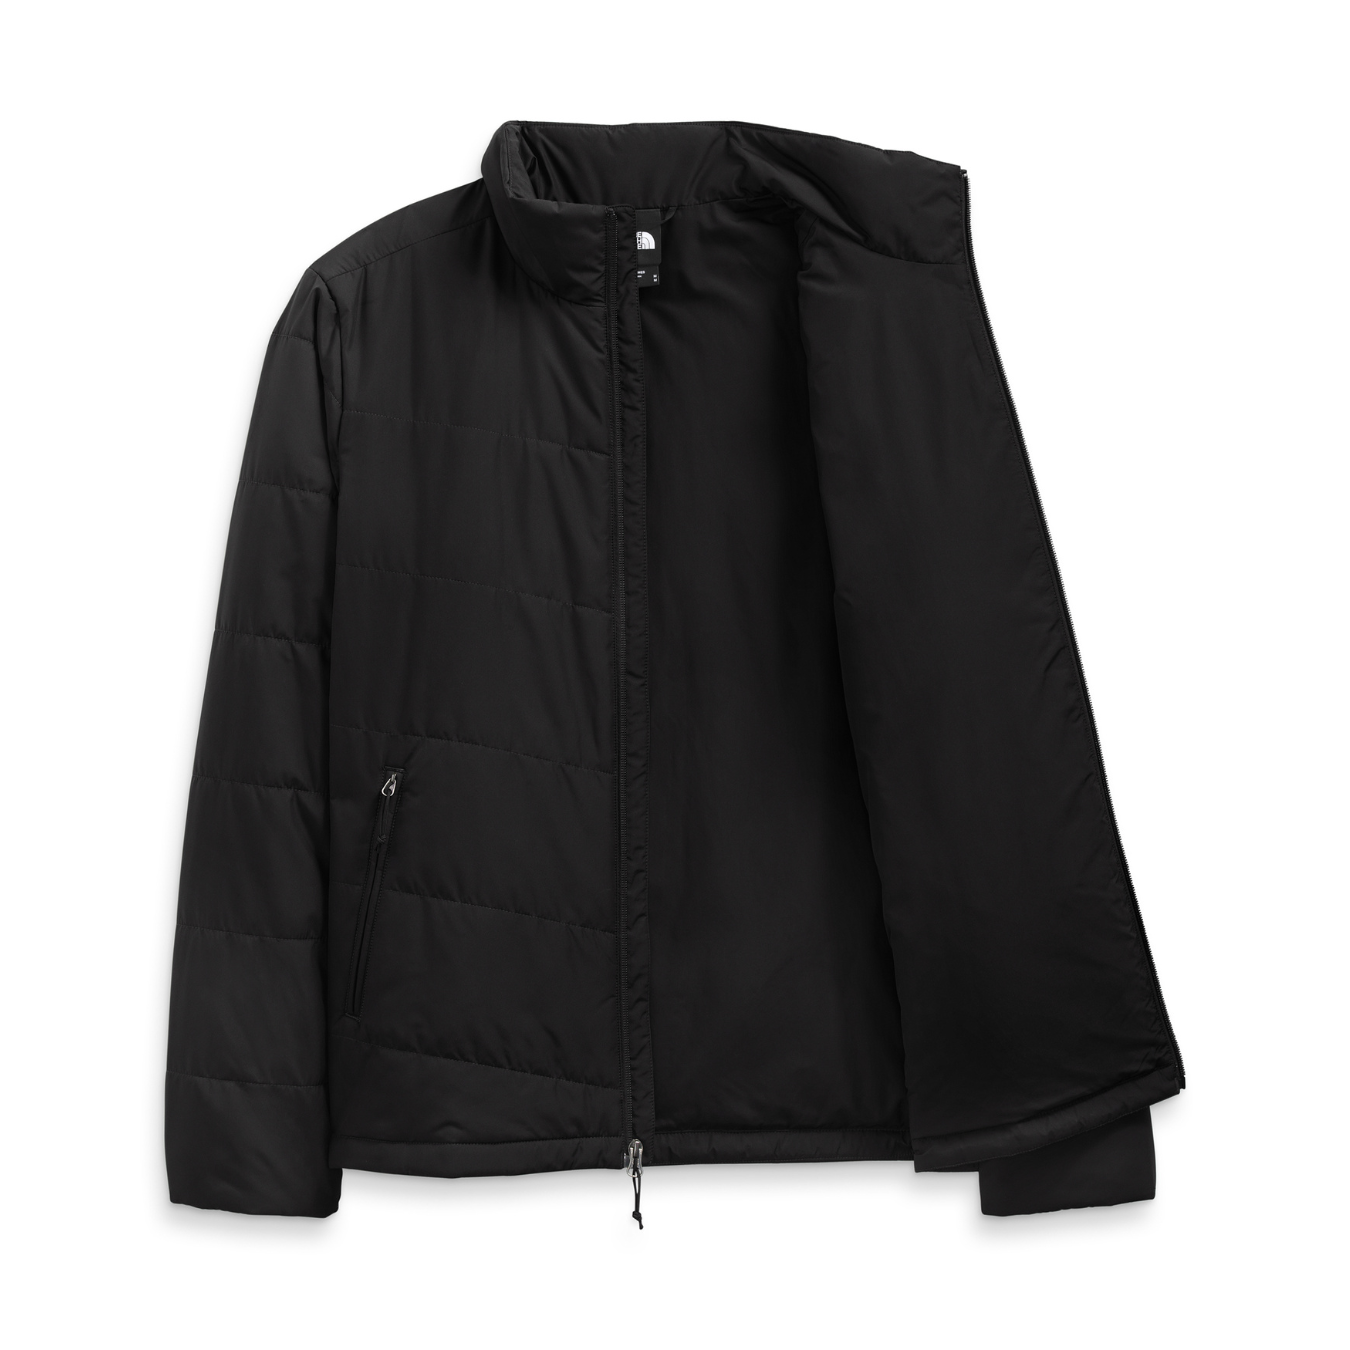 Chaqueta The North Face Junction Insulated Hombre Color Negro | Outdoor Adventure